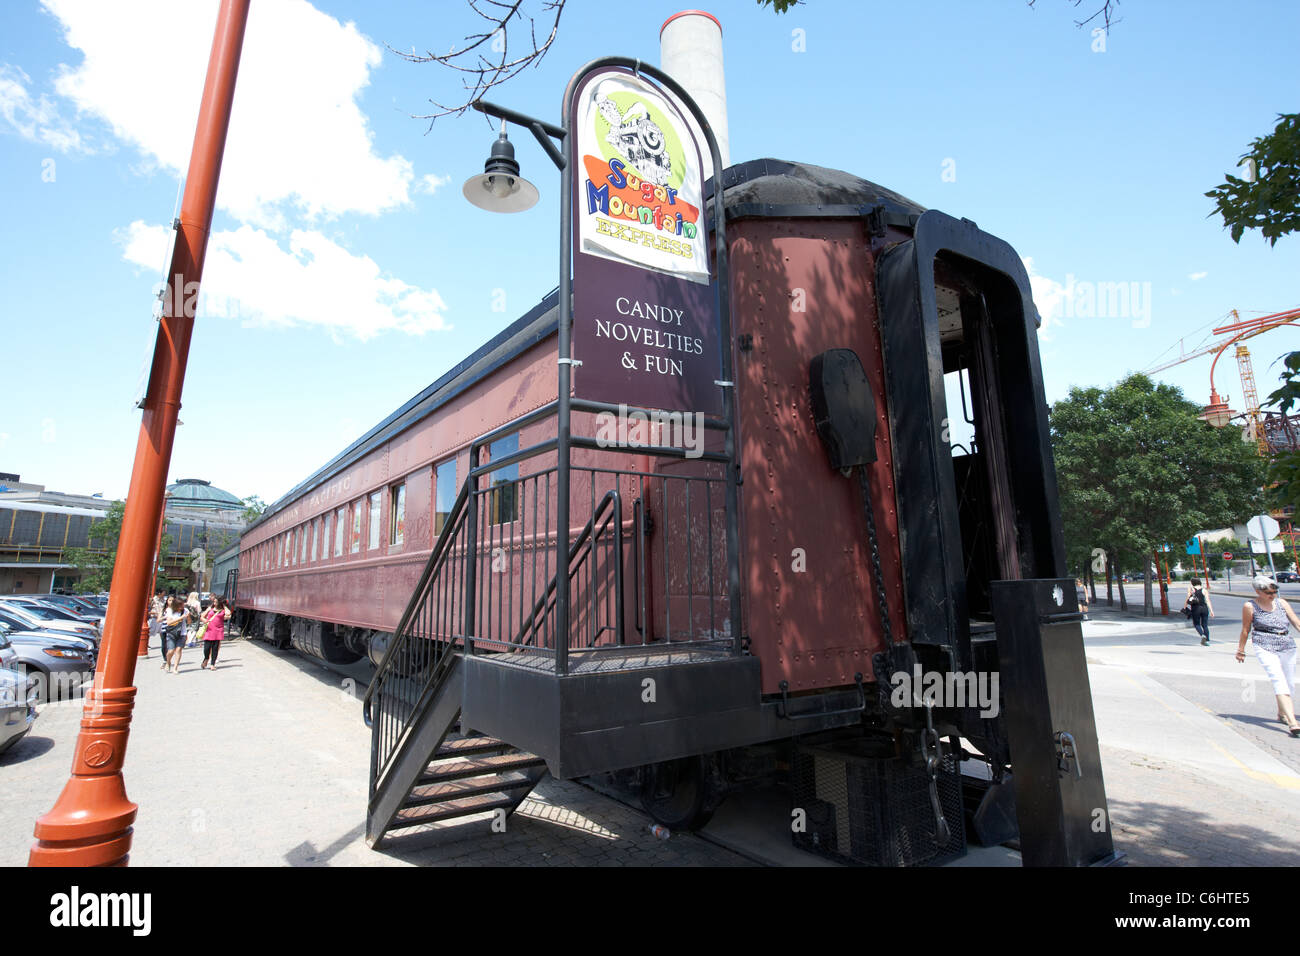 sugar mountain express candy shop in old canadian pacific railway car in the forks winnipeg manitoba canada Stock Photo